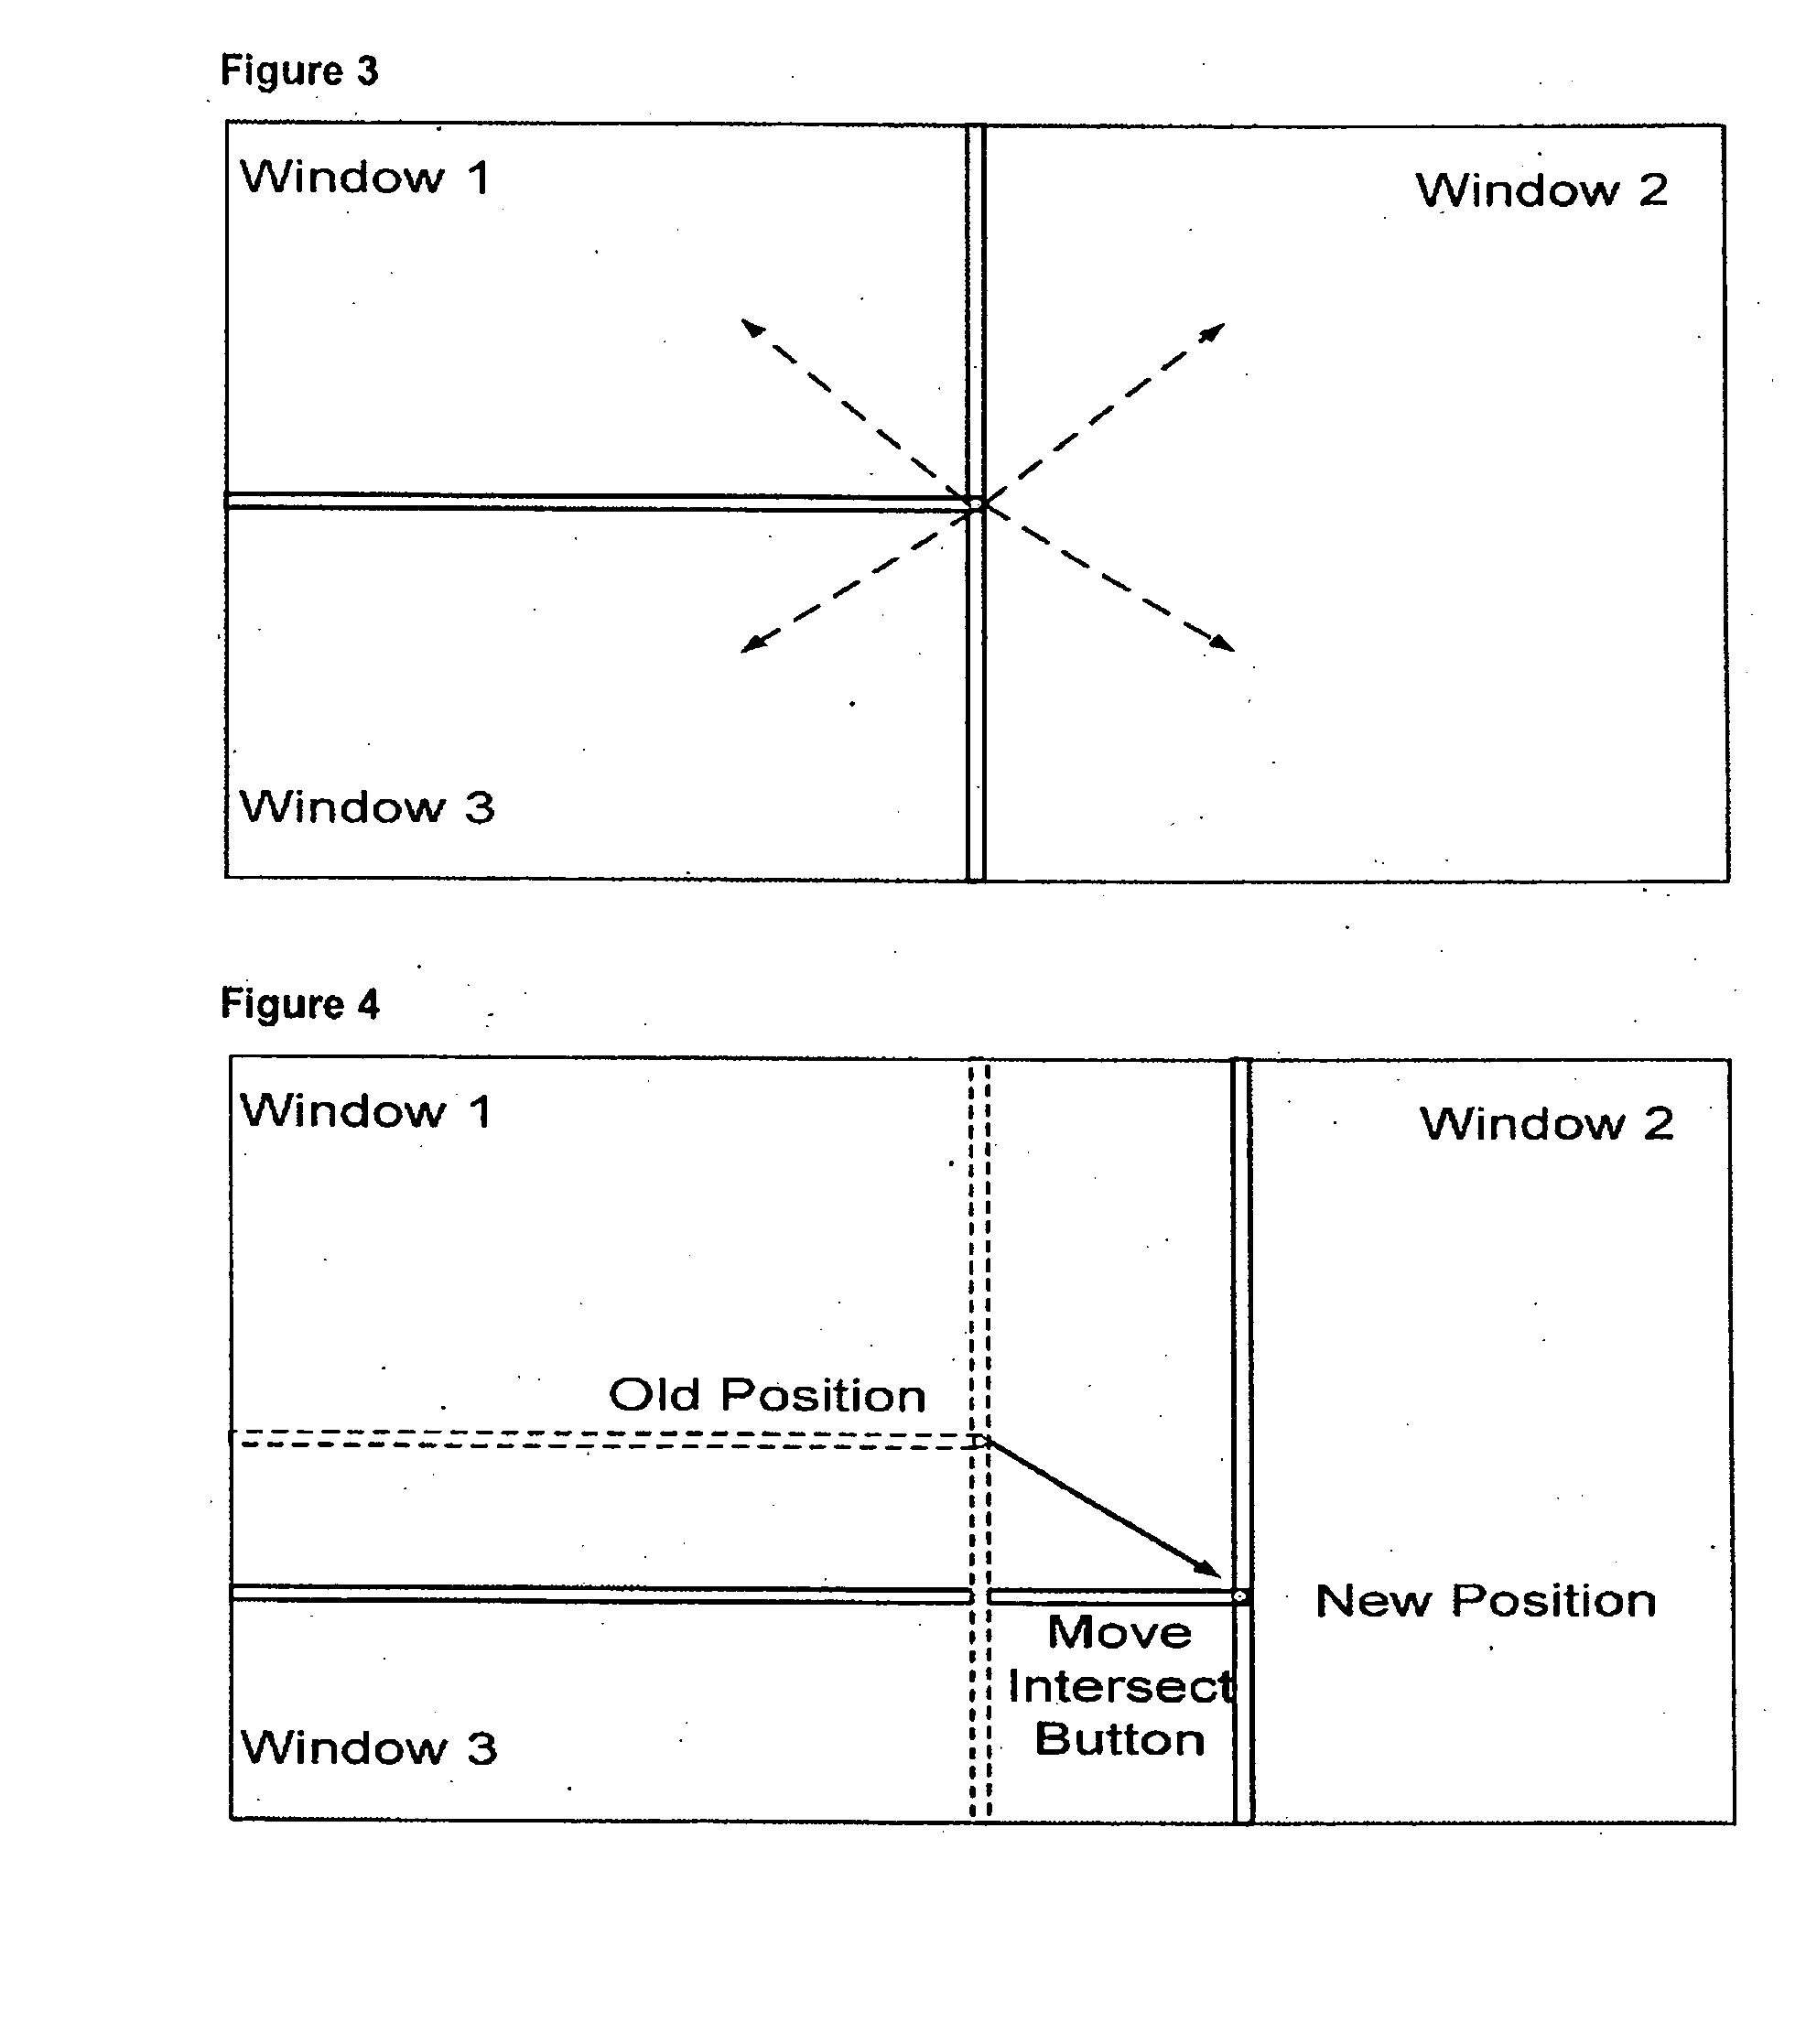 Method and apparatus for the display and/or processing of information, such as data